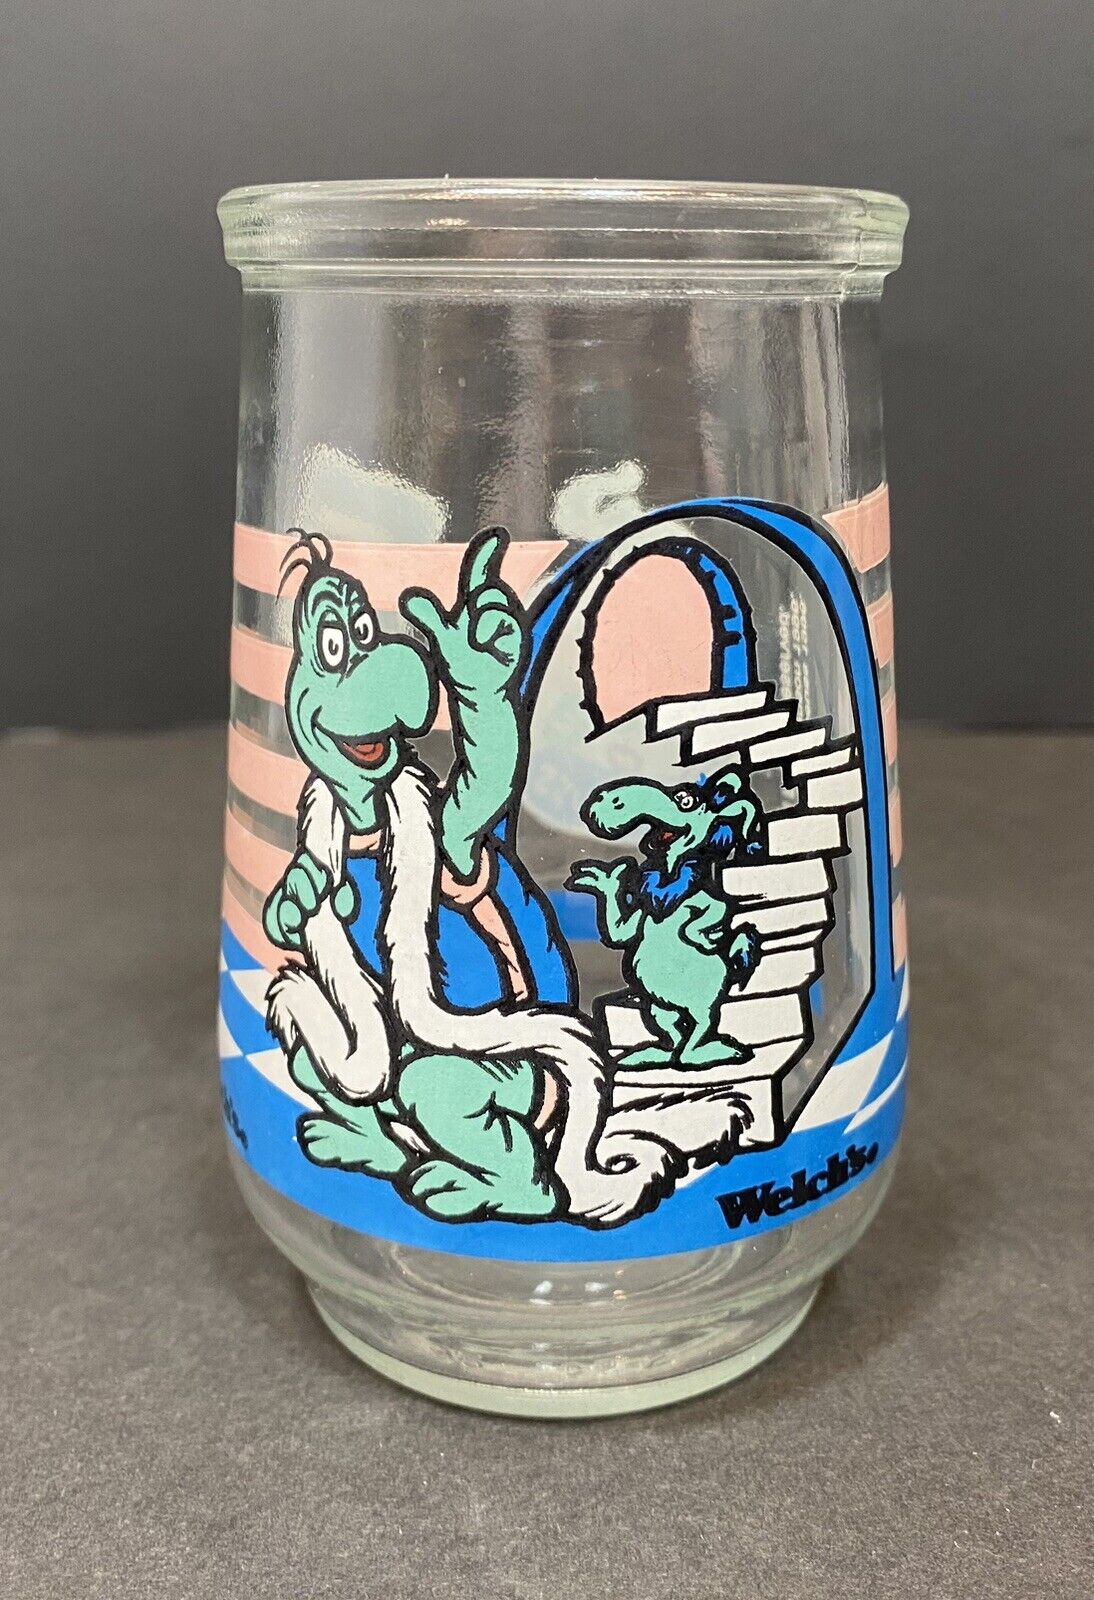 Welch’s Jelly Glass - Dr Seuss No. 5 - Yertle the Turtle and Friend